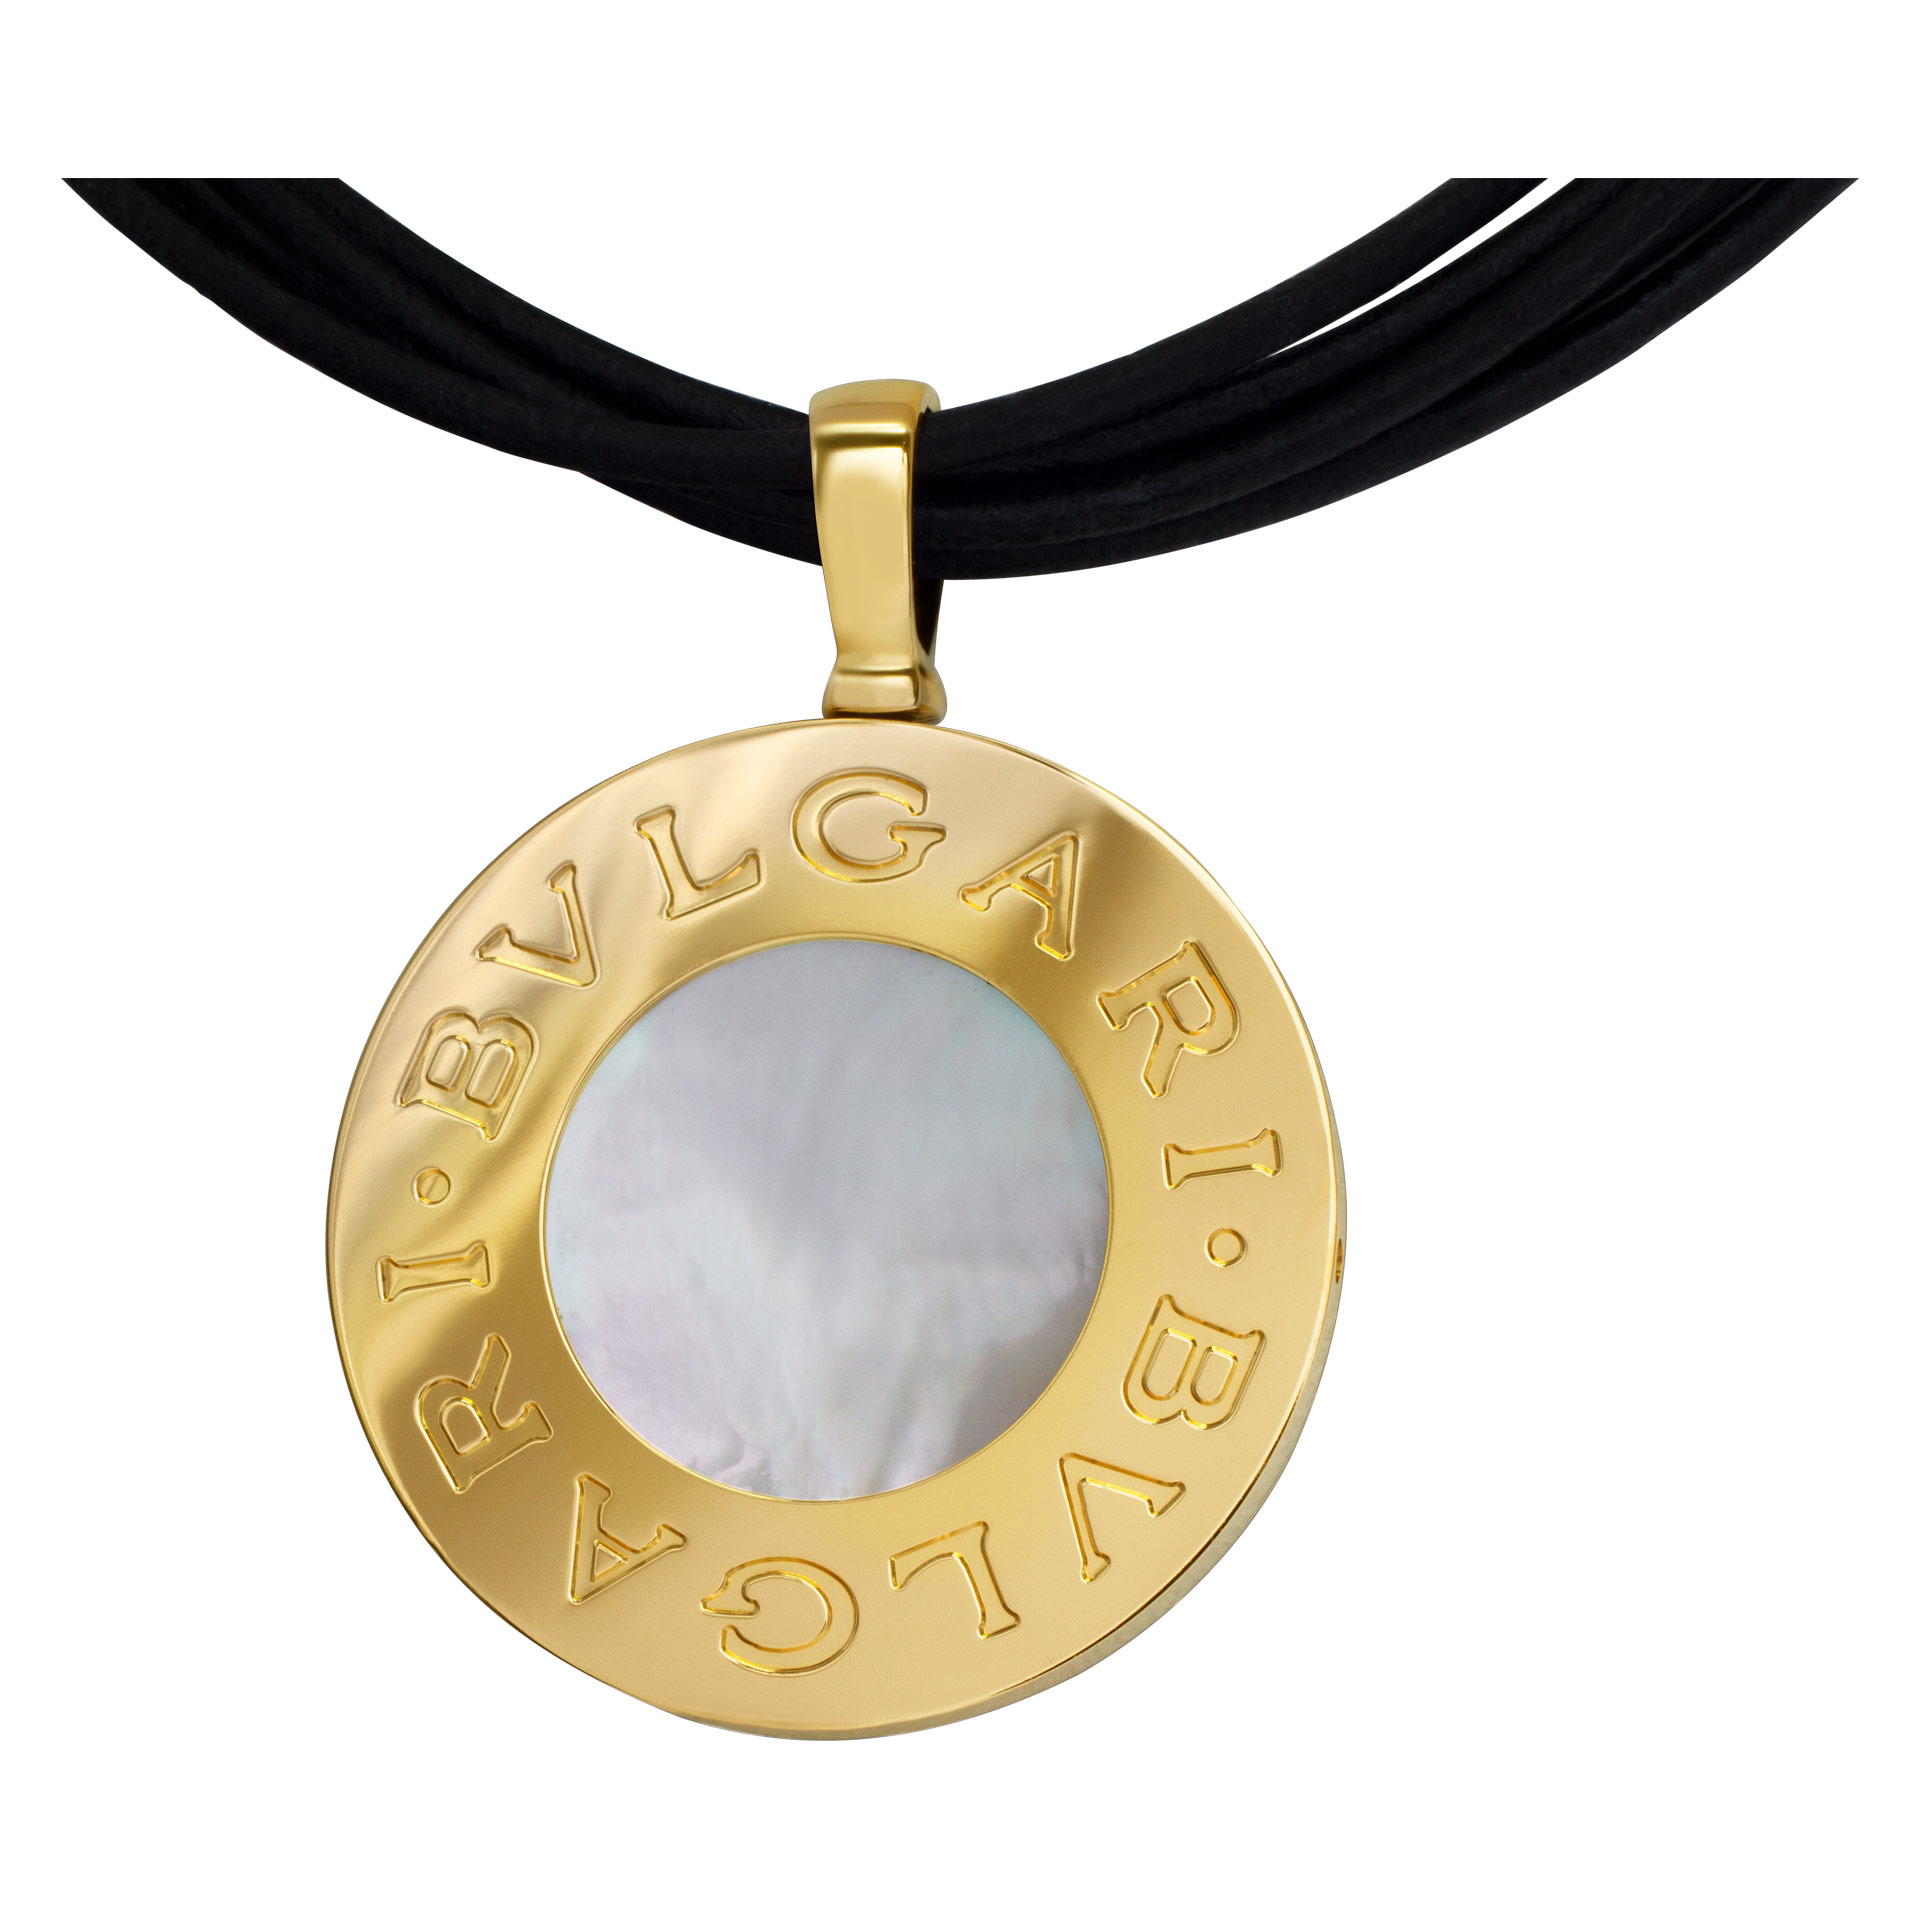 Bvlgari 18k yellow gold with mother of pearl and steel with onyx center necklace